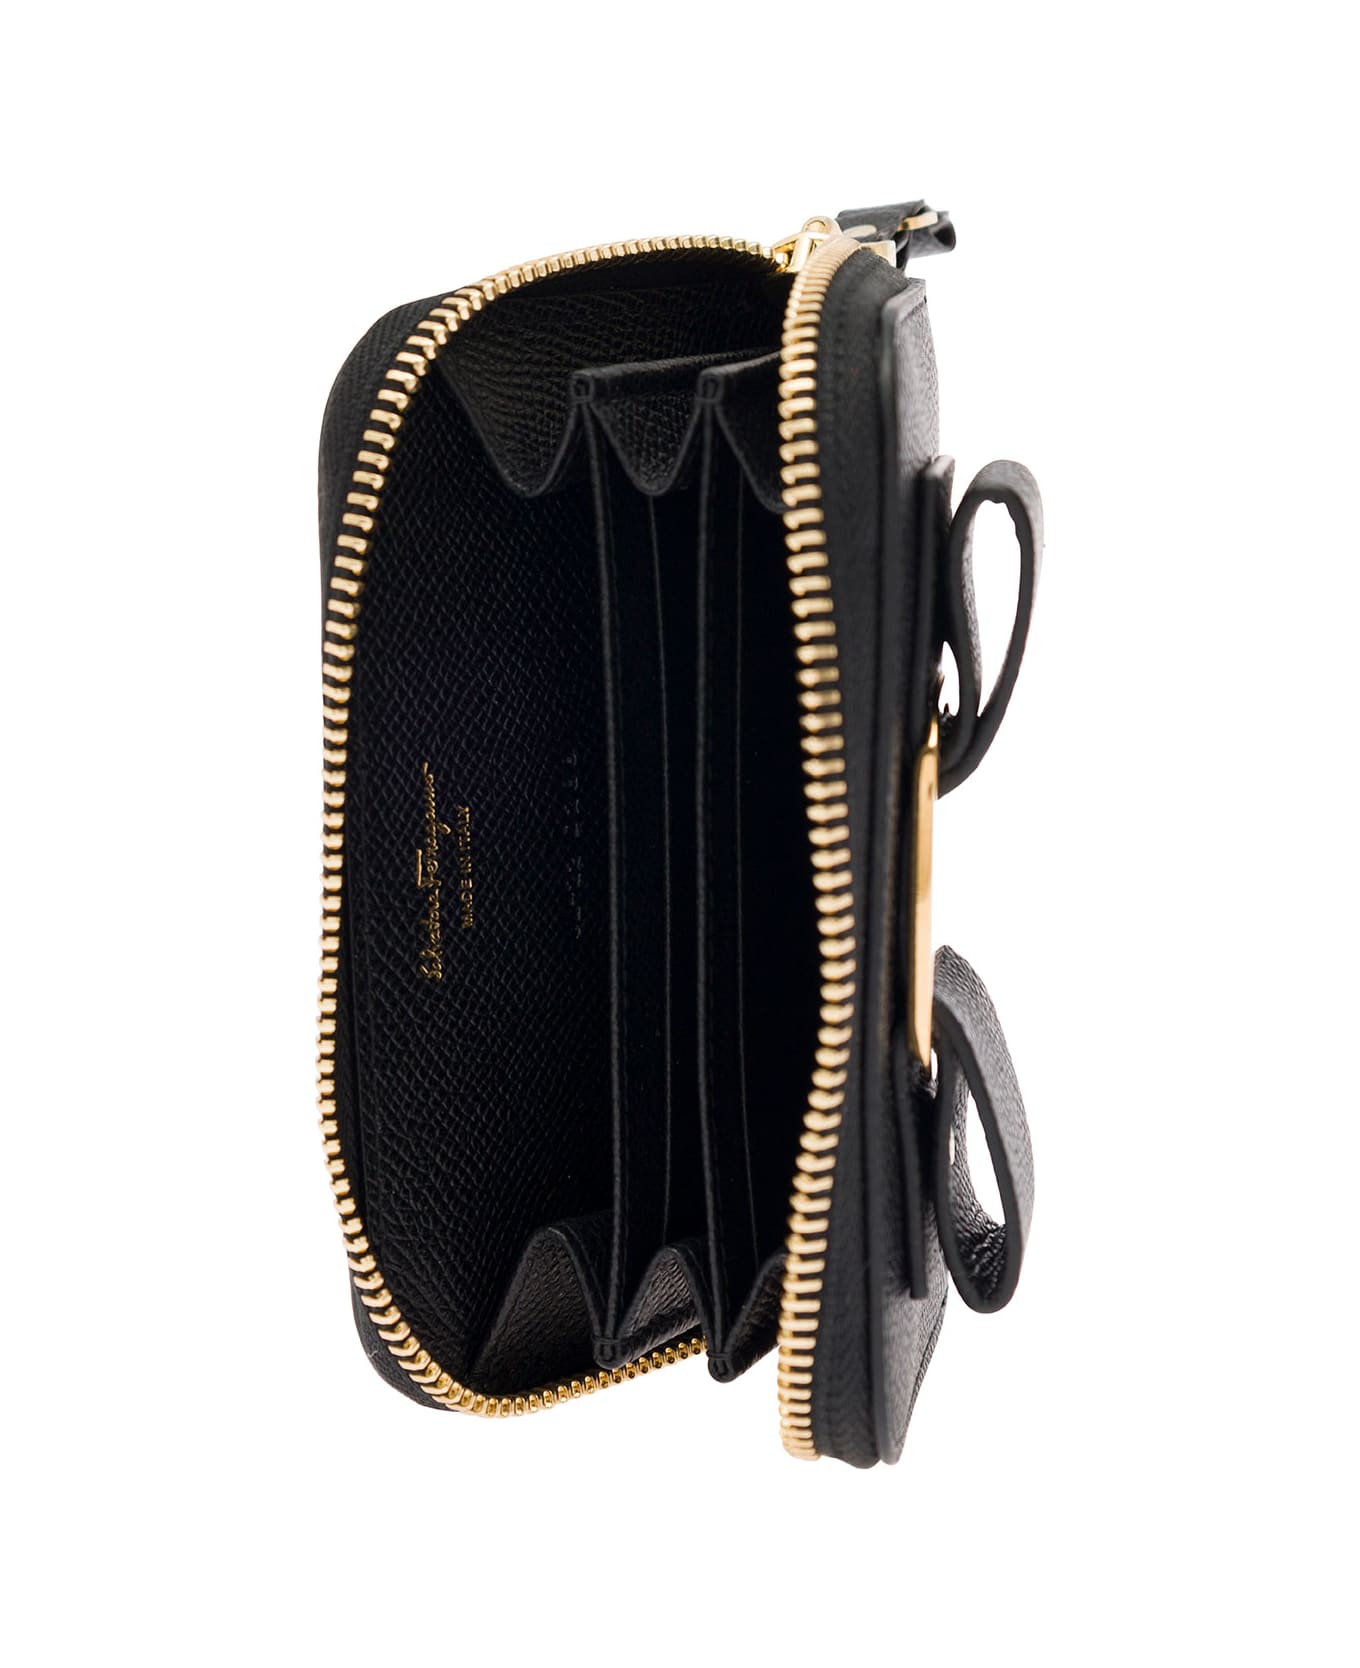 Ferragamo 'vara' Black Card-holder With Bow And Logo Detail In Hammered Leather Woman - Black アクセサリー